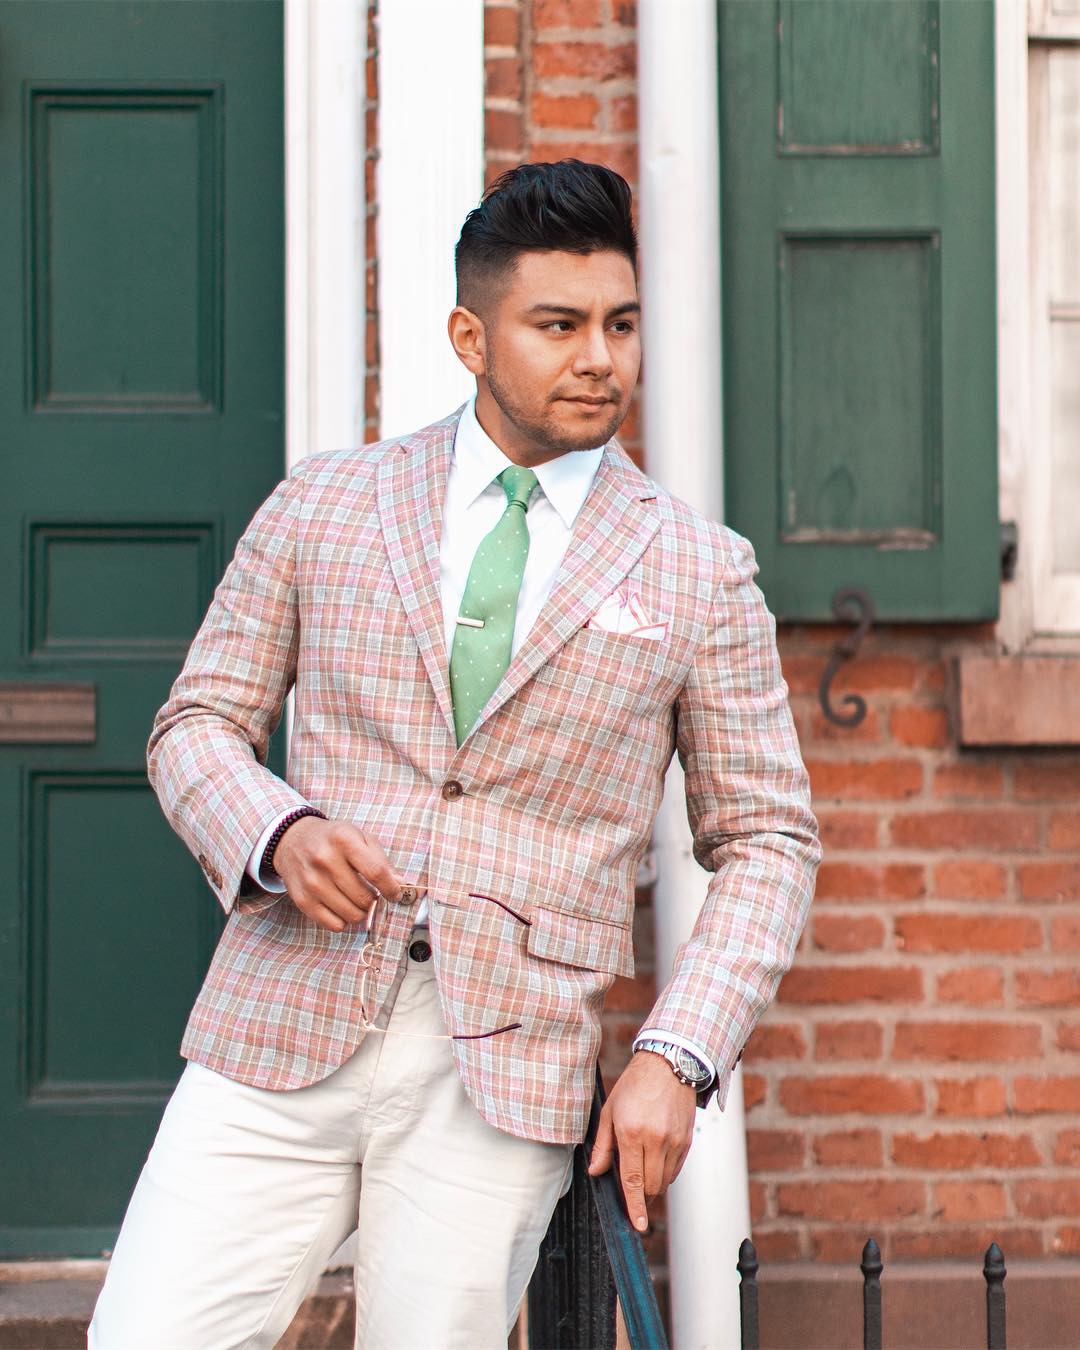 White pants / chinos with pink plaid jacket and green tie - dandy in the bronx